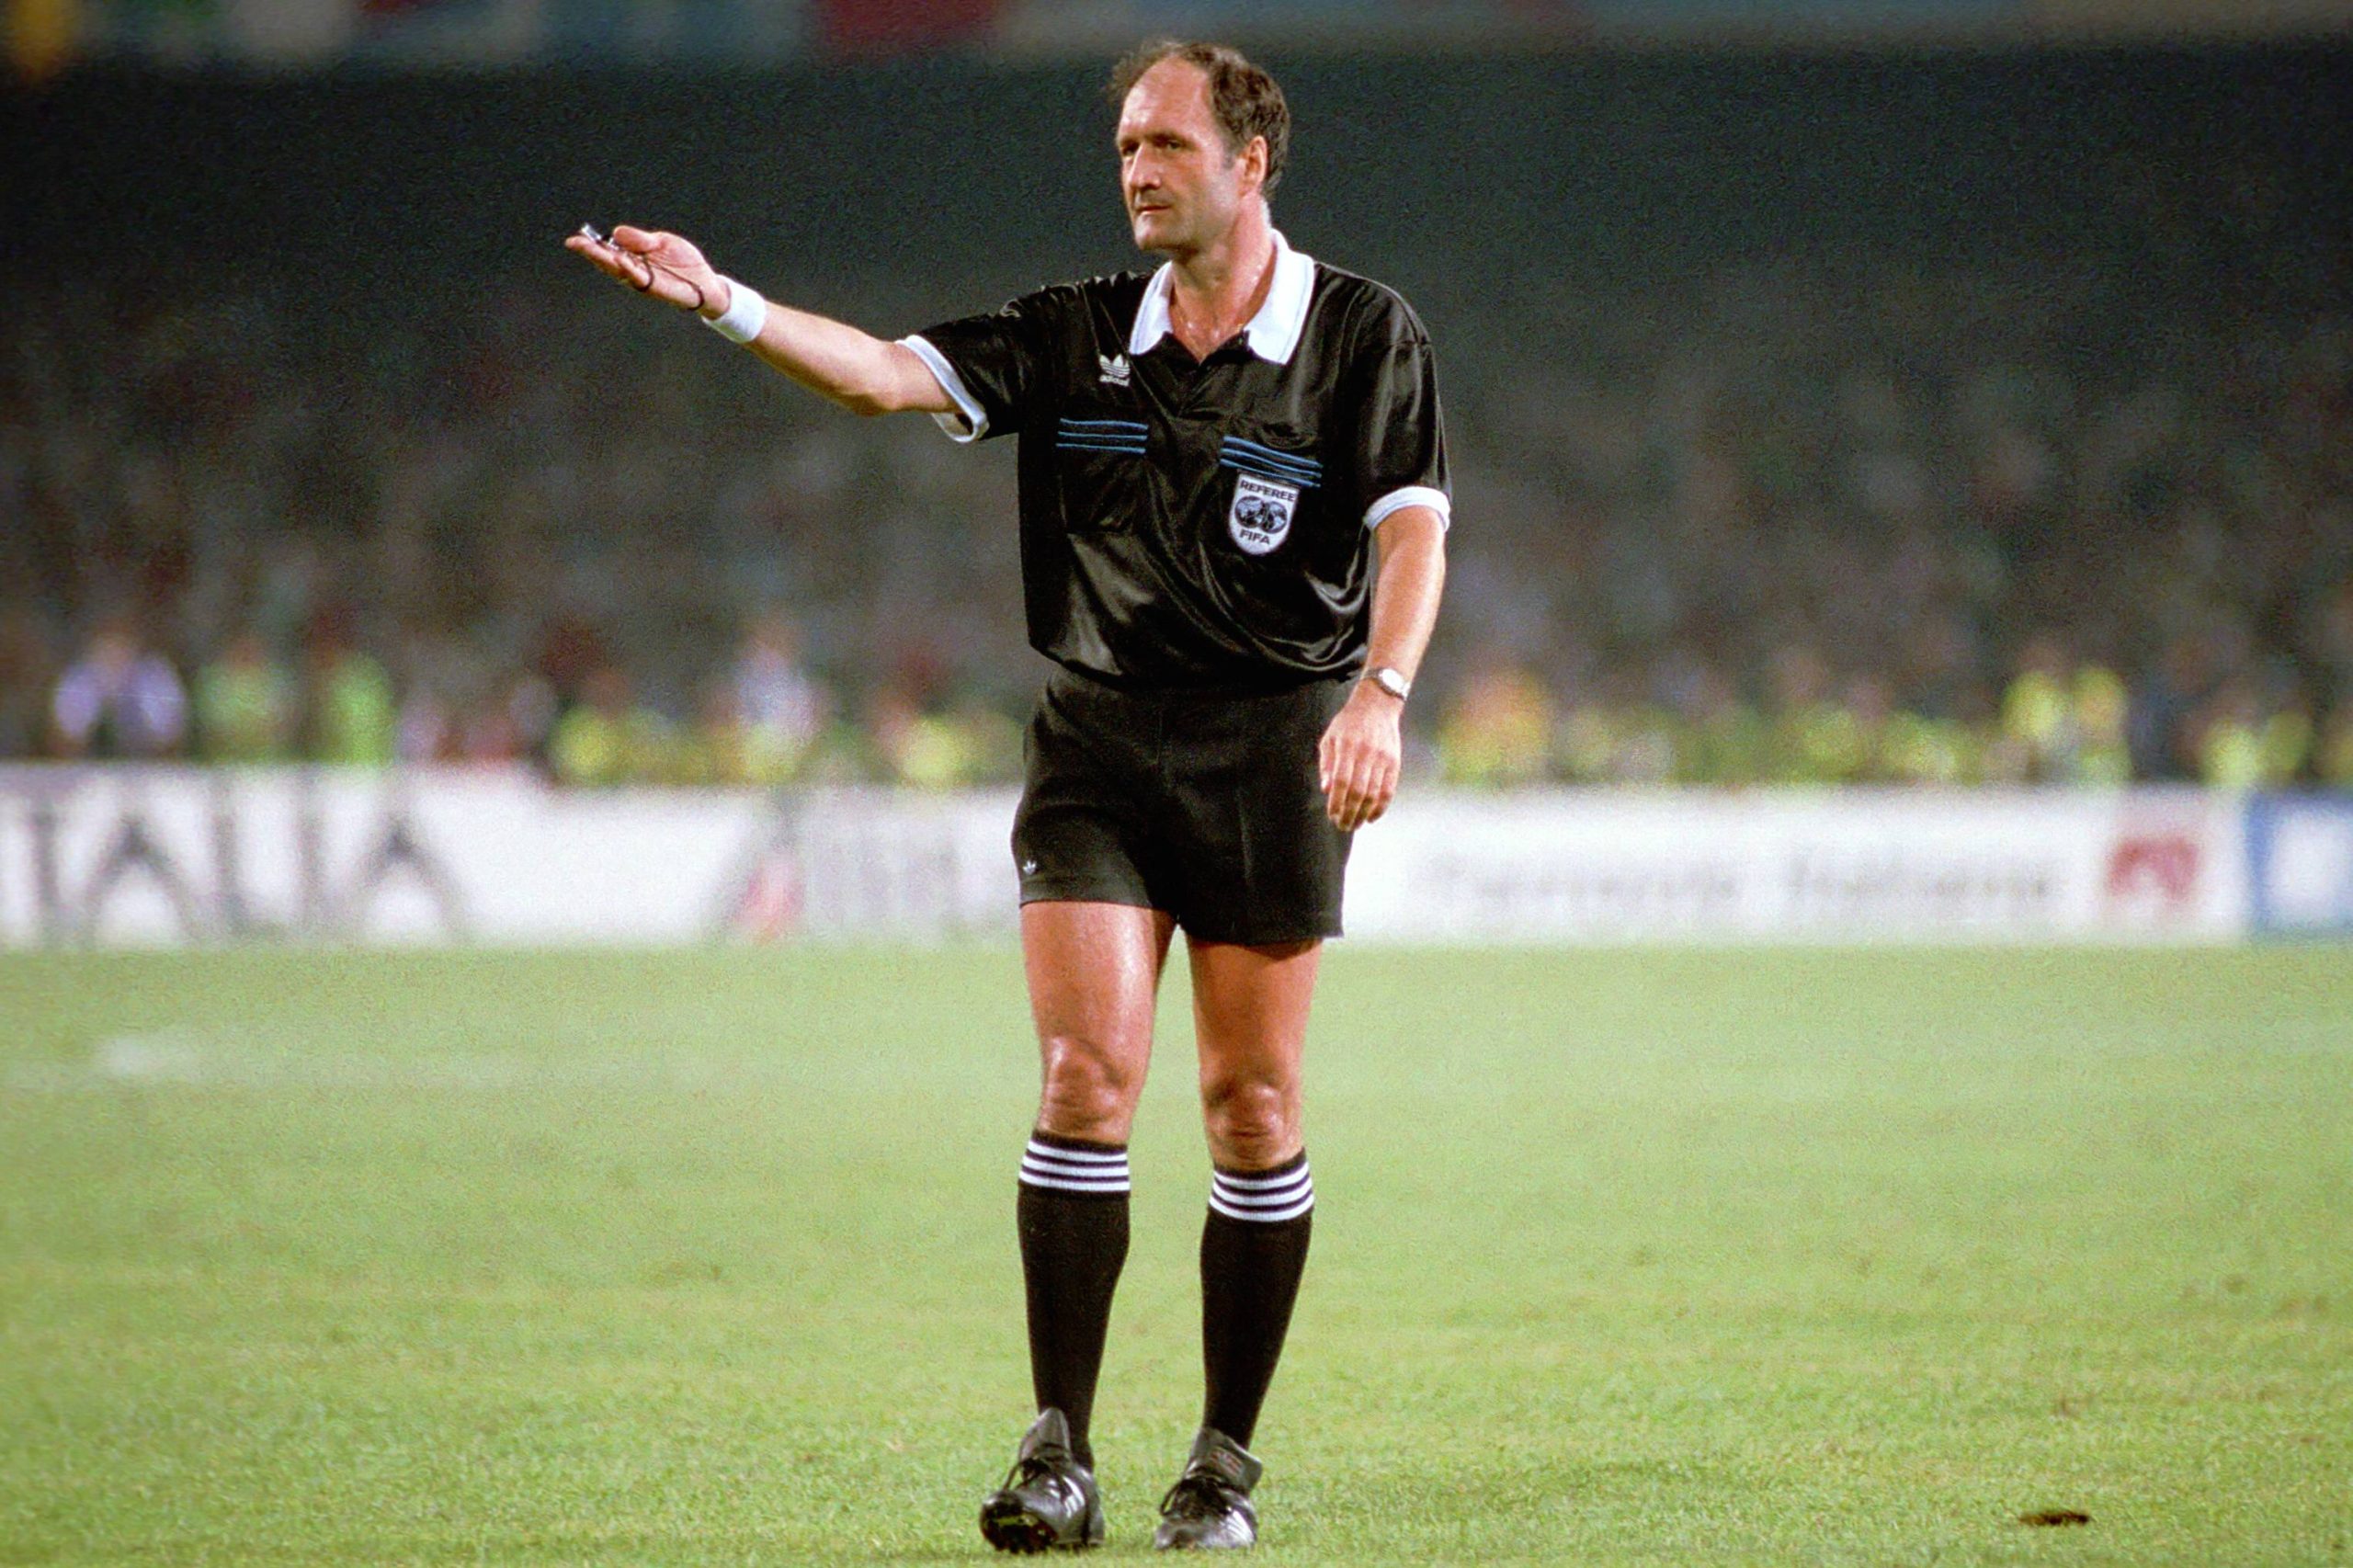 Michel Vautrot is one of the best football referees of all timeMichel Vautrot is one of the best football referees of all time